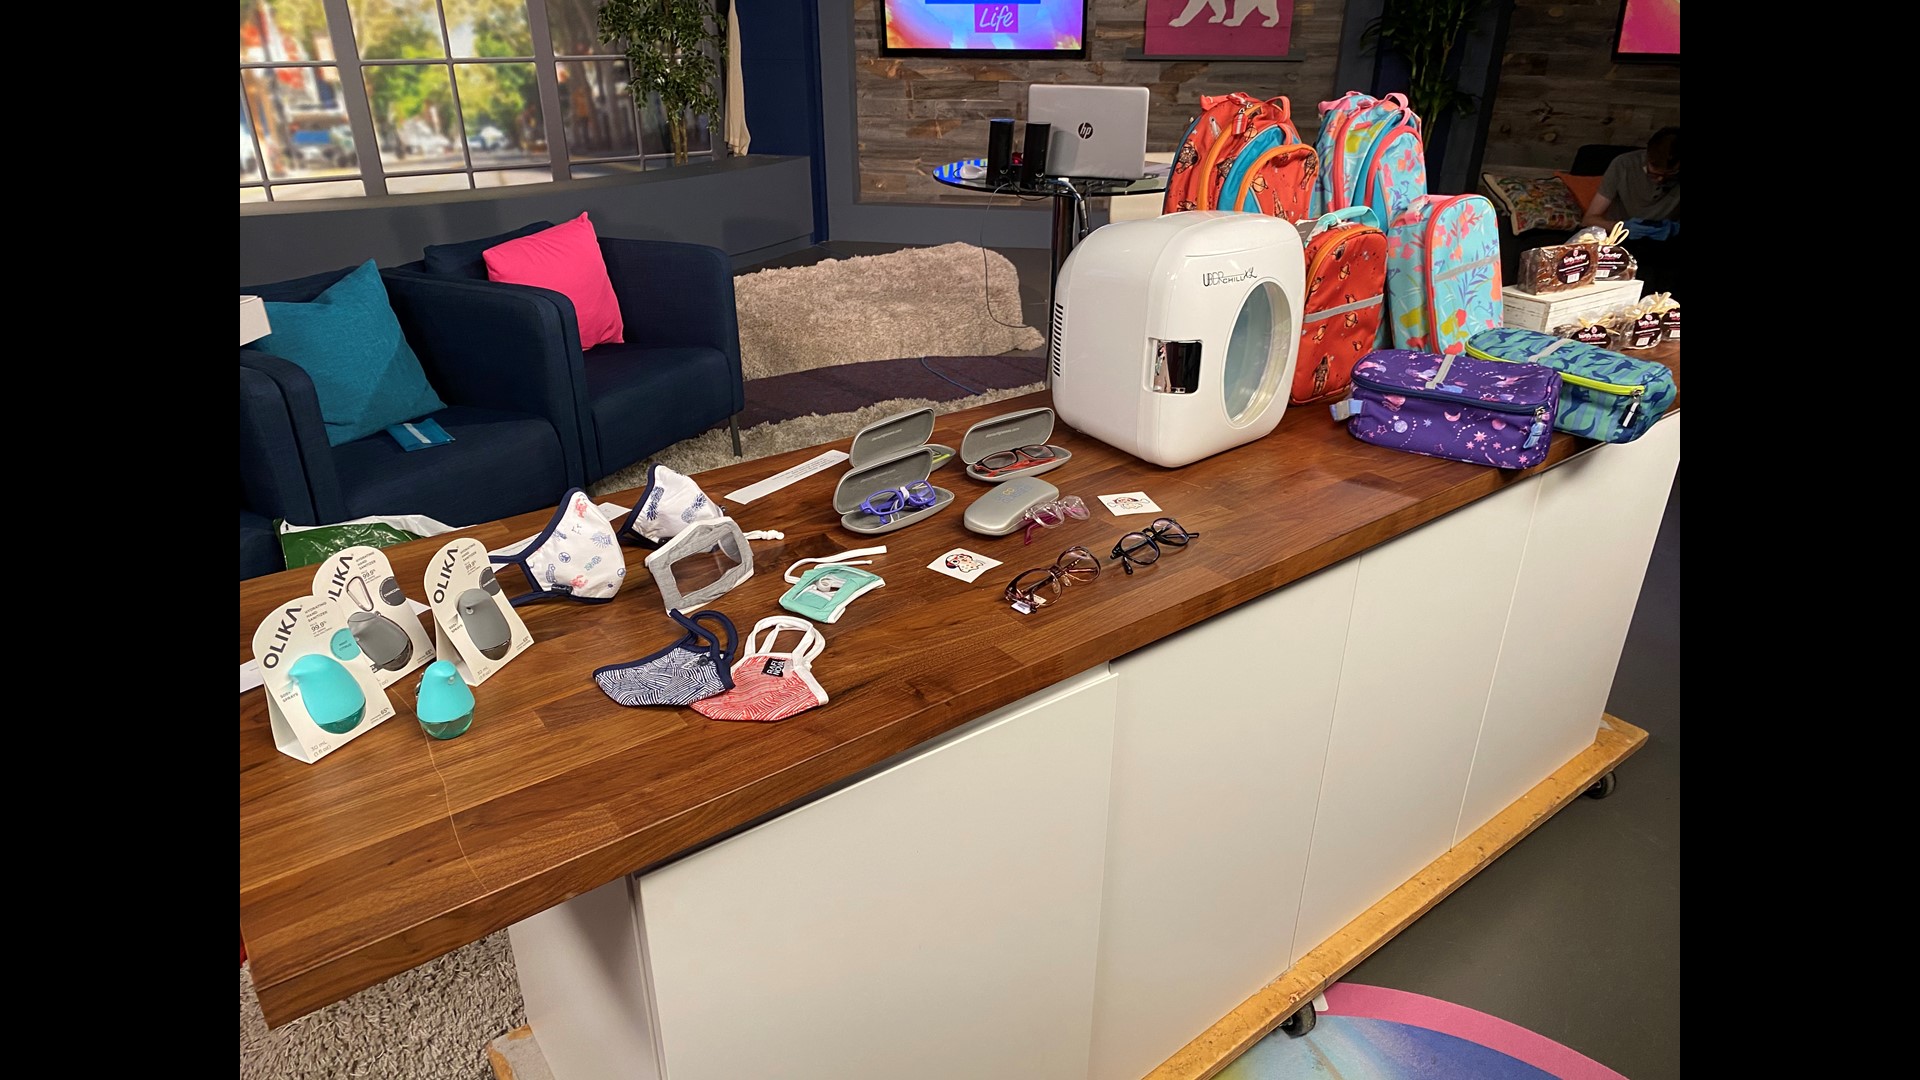 Your California Life host Aubrey Aquino reveals her product picks for back to school this year for distance learning and more.